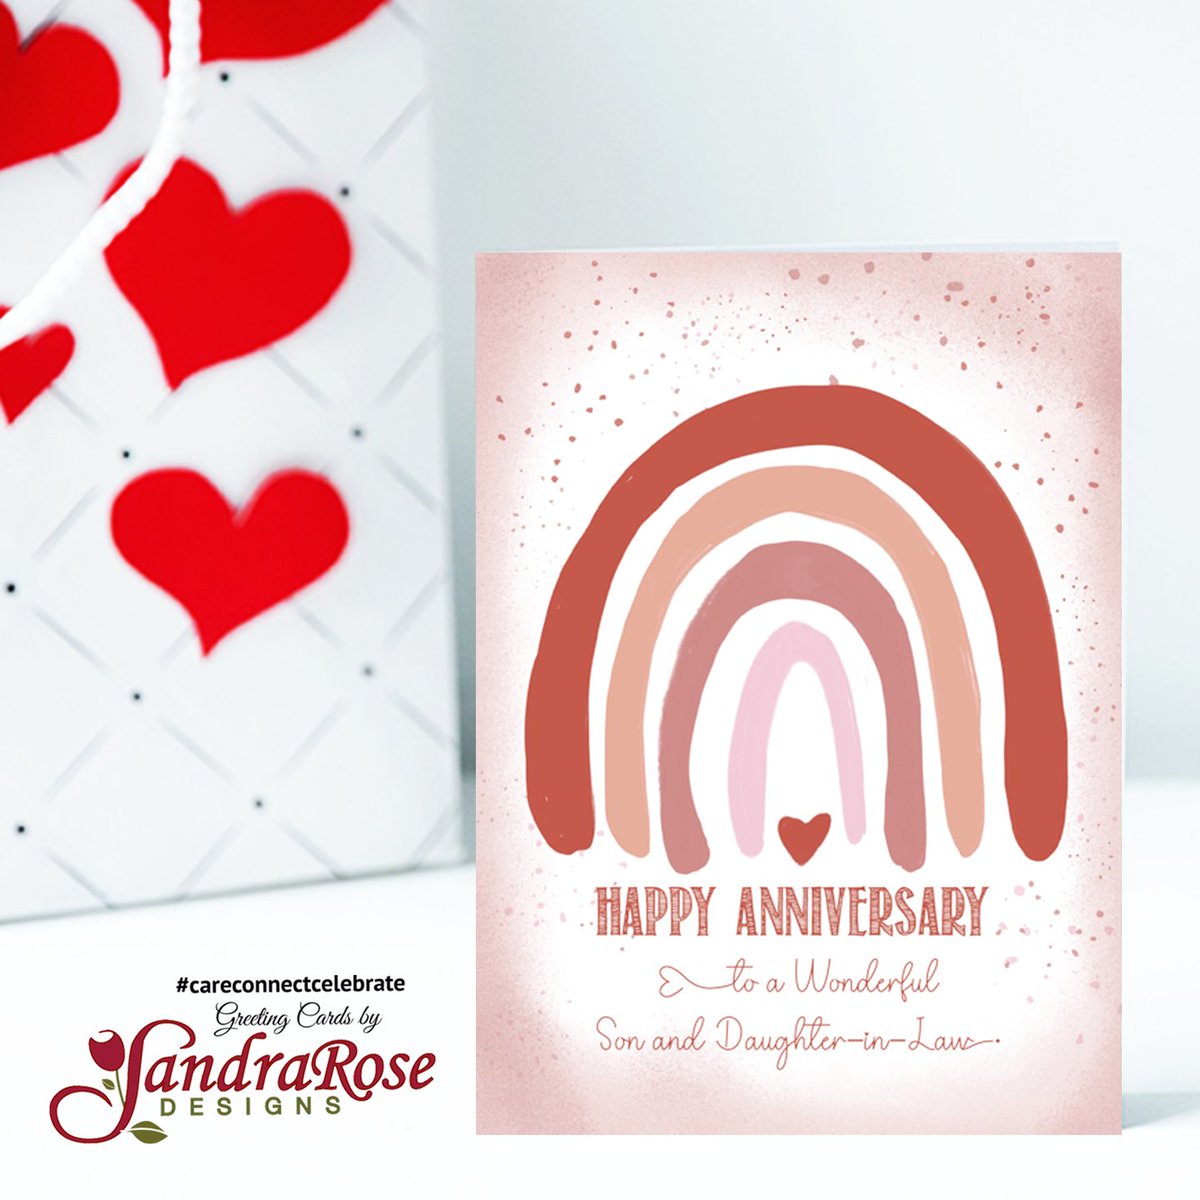 This greeting card is designed to convey warmth, love, celebration, and heartfelt sentiments that focus on the lasting, special, and cherished aspects of a couple's relationship. #CareConnectCelebrate #SandraRoseDesigns @GCUniverse #Greetingcards greetingcarduniverse.com/anniversary-we…